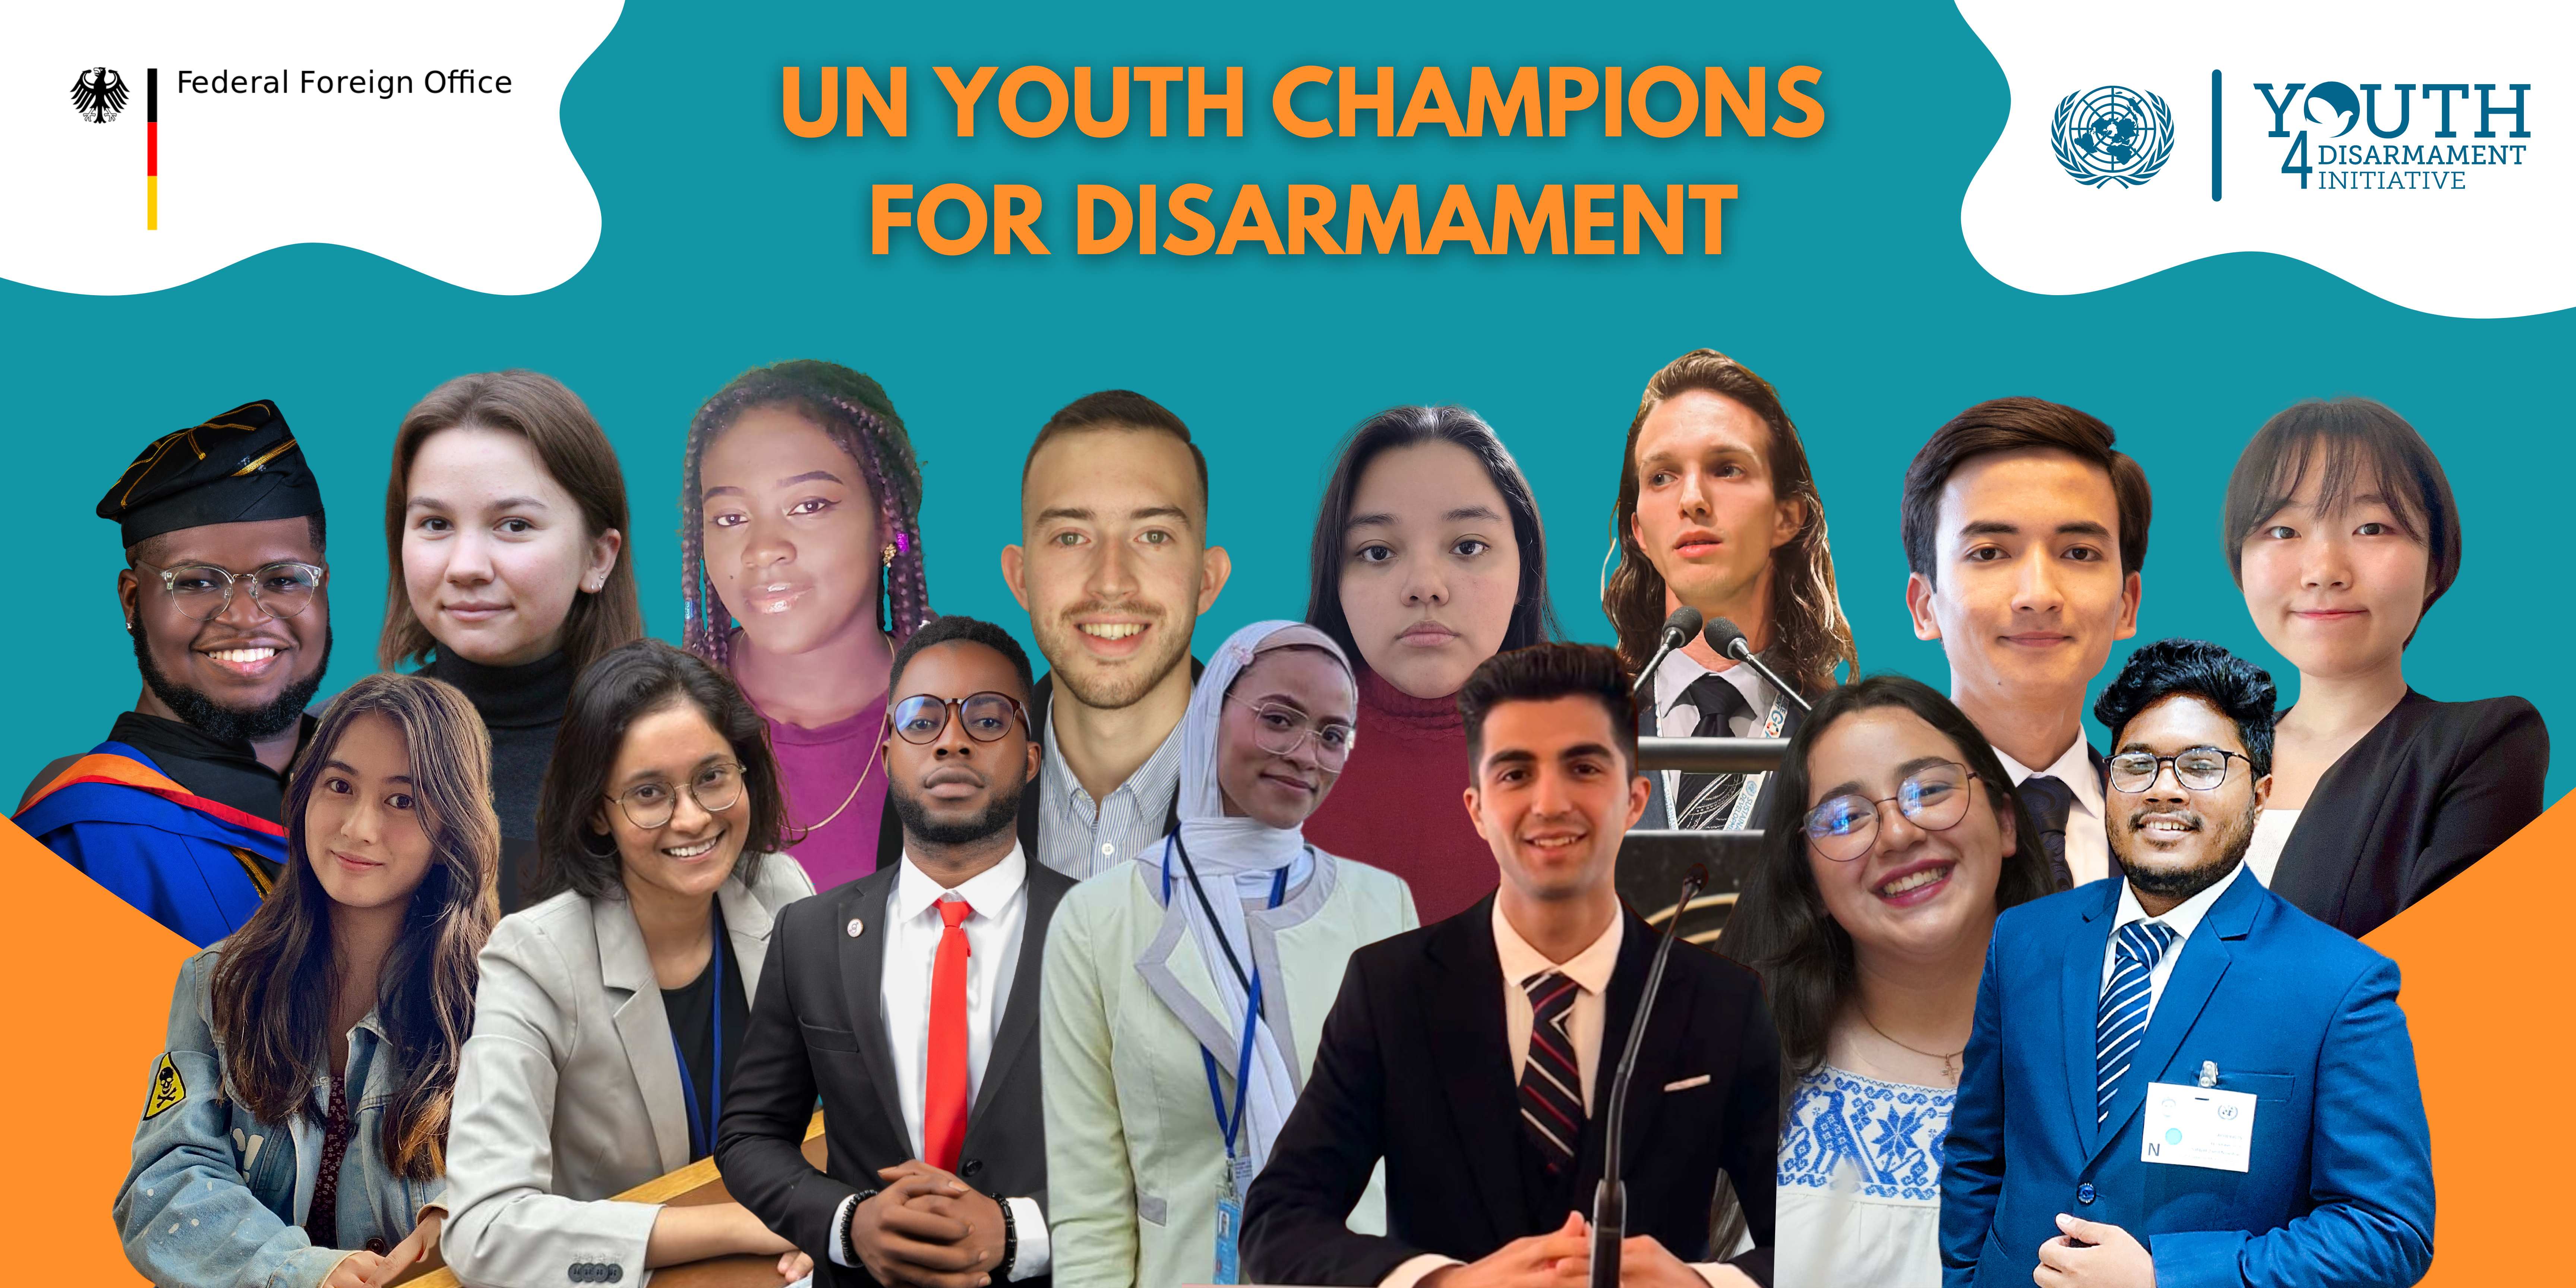 UN Youth Champions for Disarmament - 2nd edition